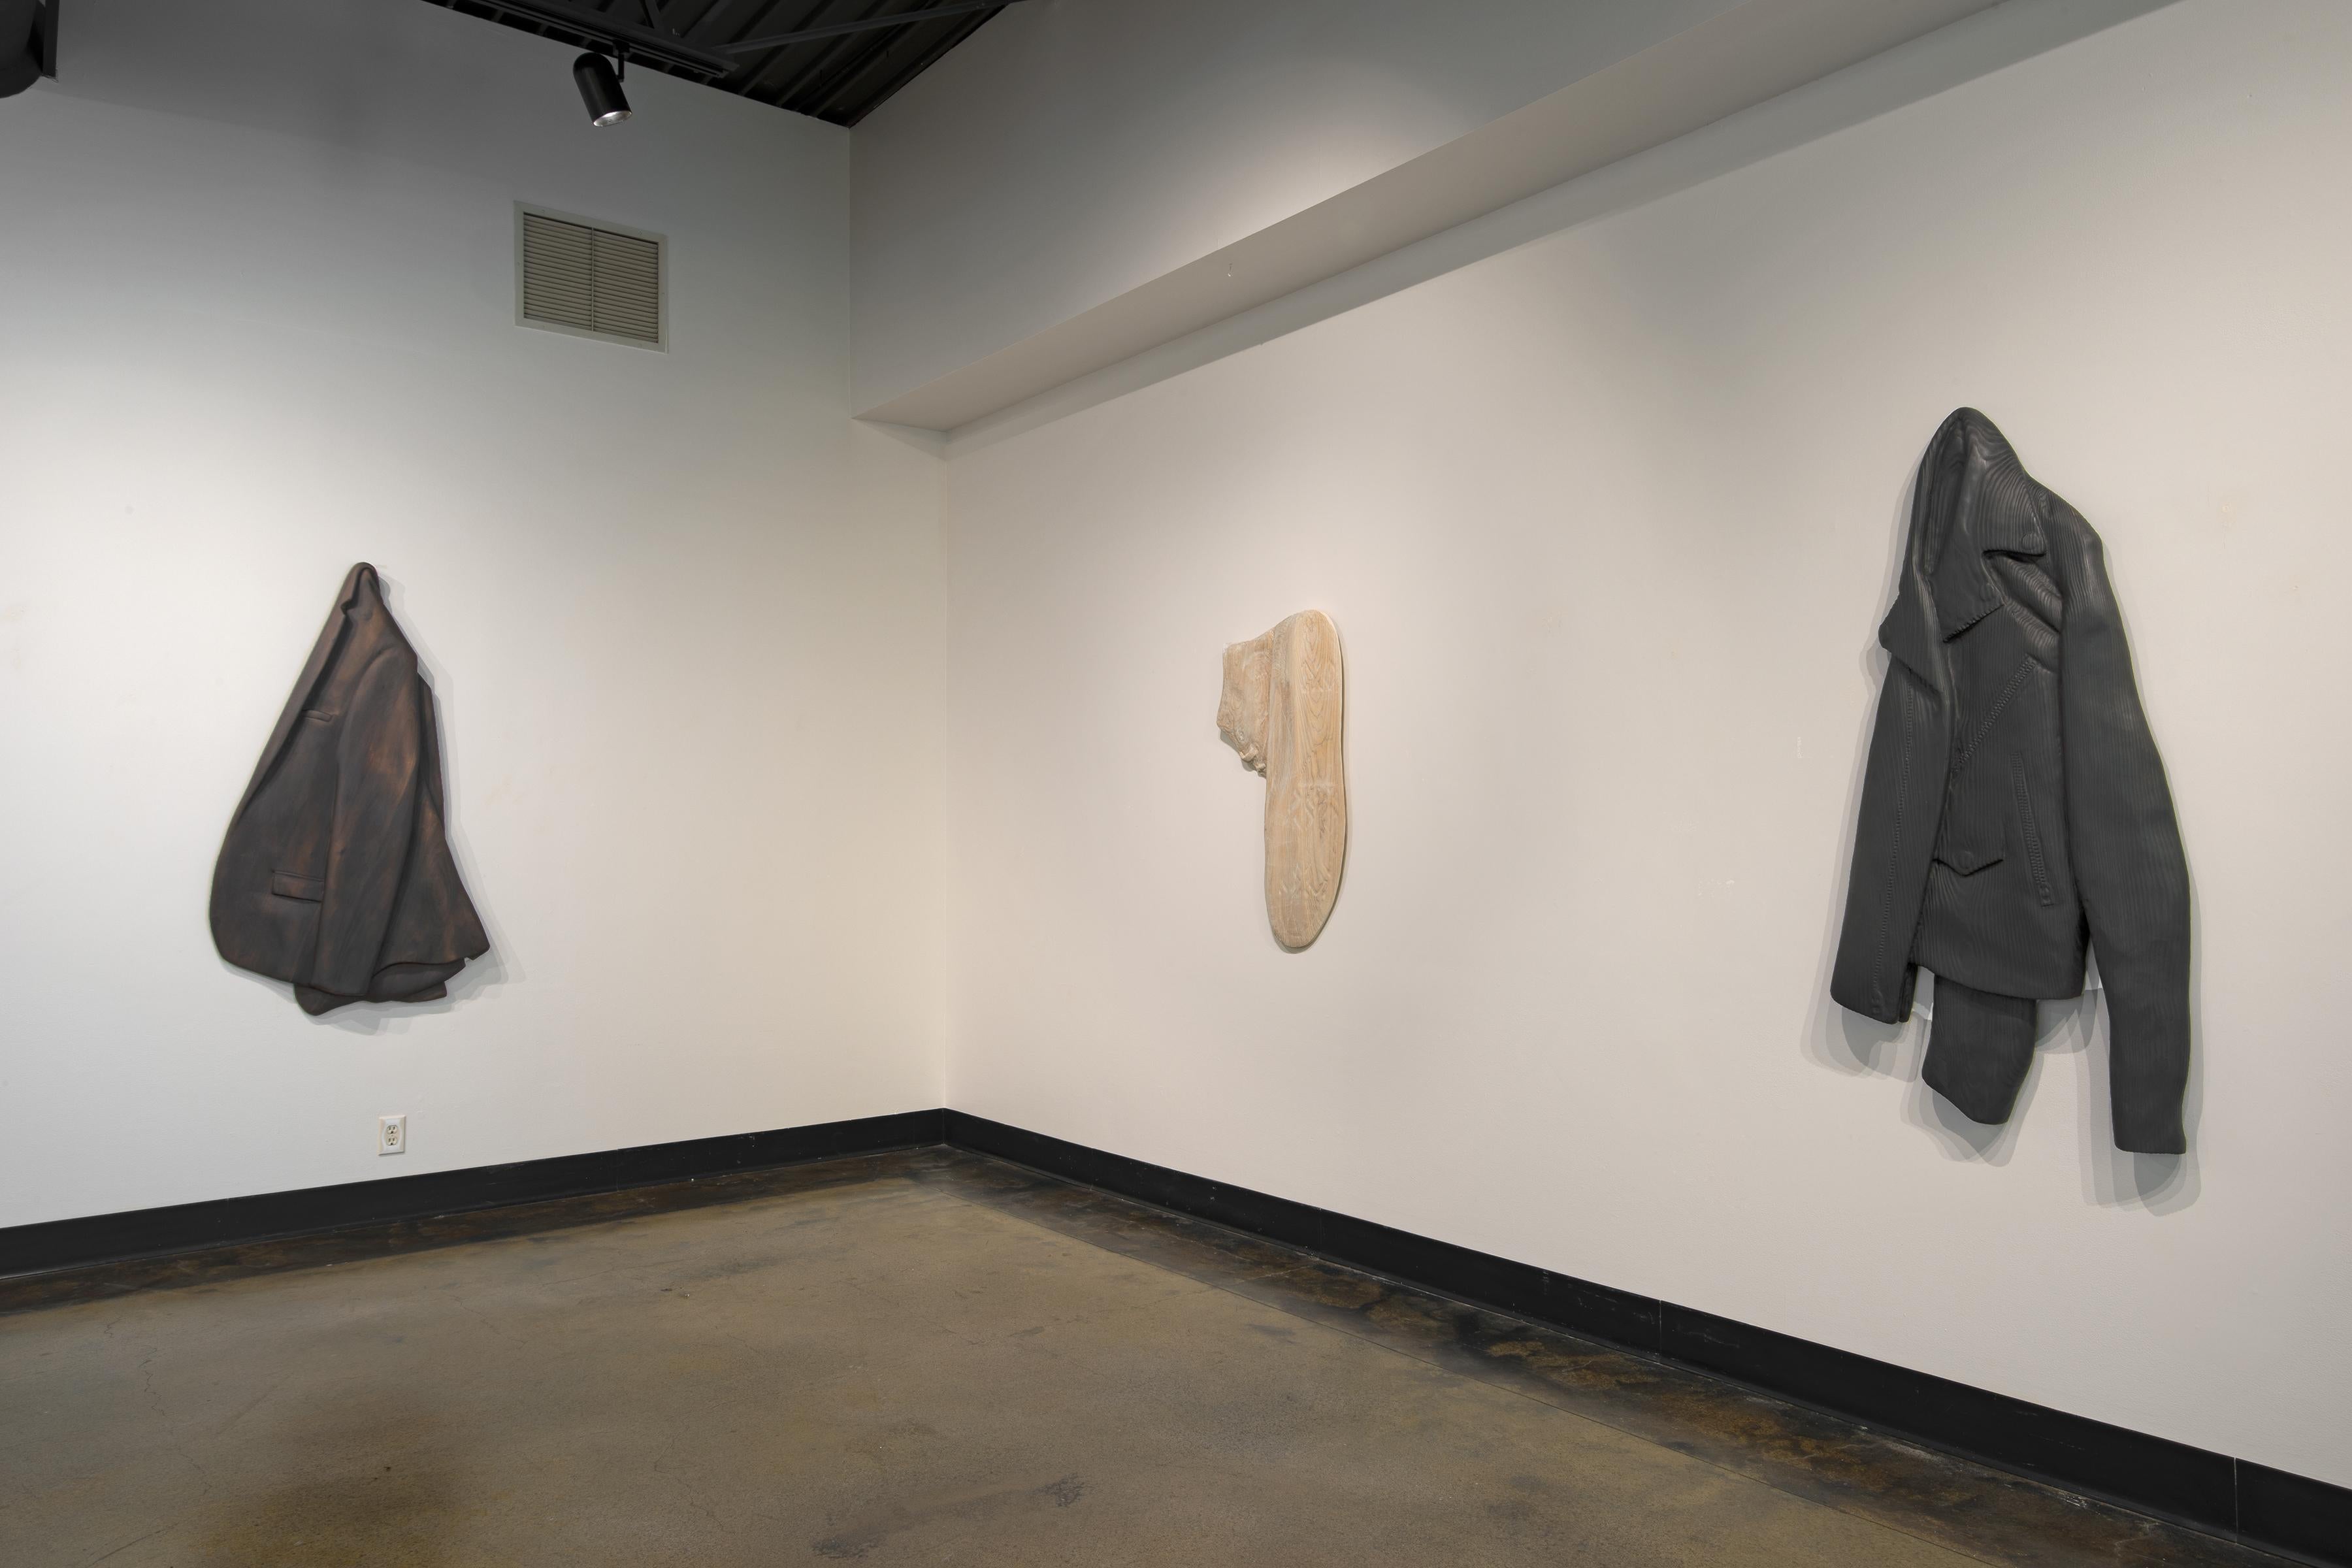 SUIT JACKET - stained wooden hanging sculpture, brown, carved wood - Brown Figurative Sculpture by Ray Padron